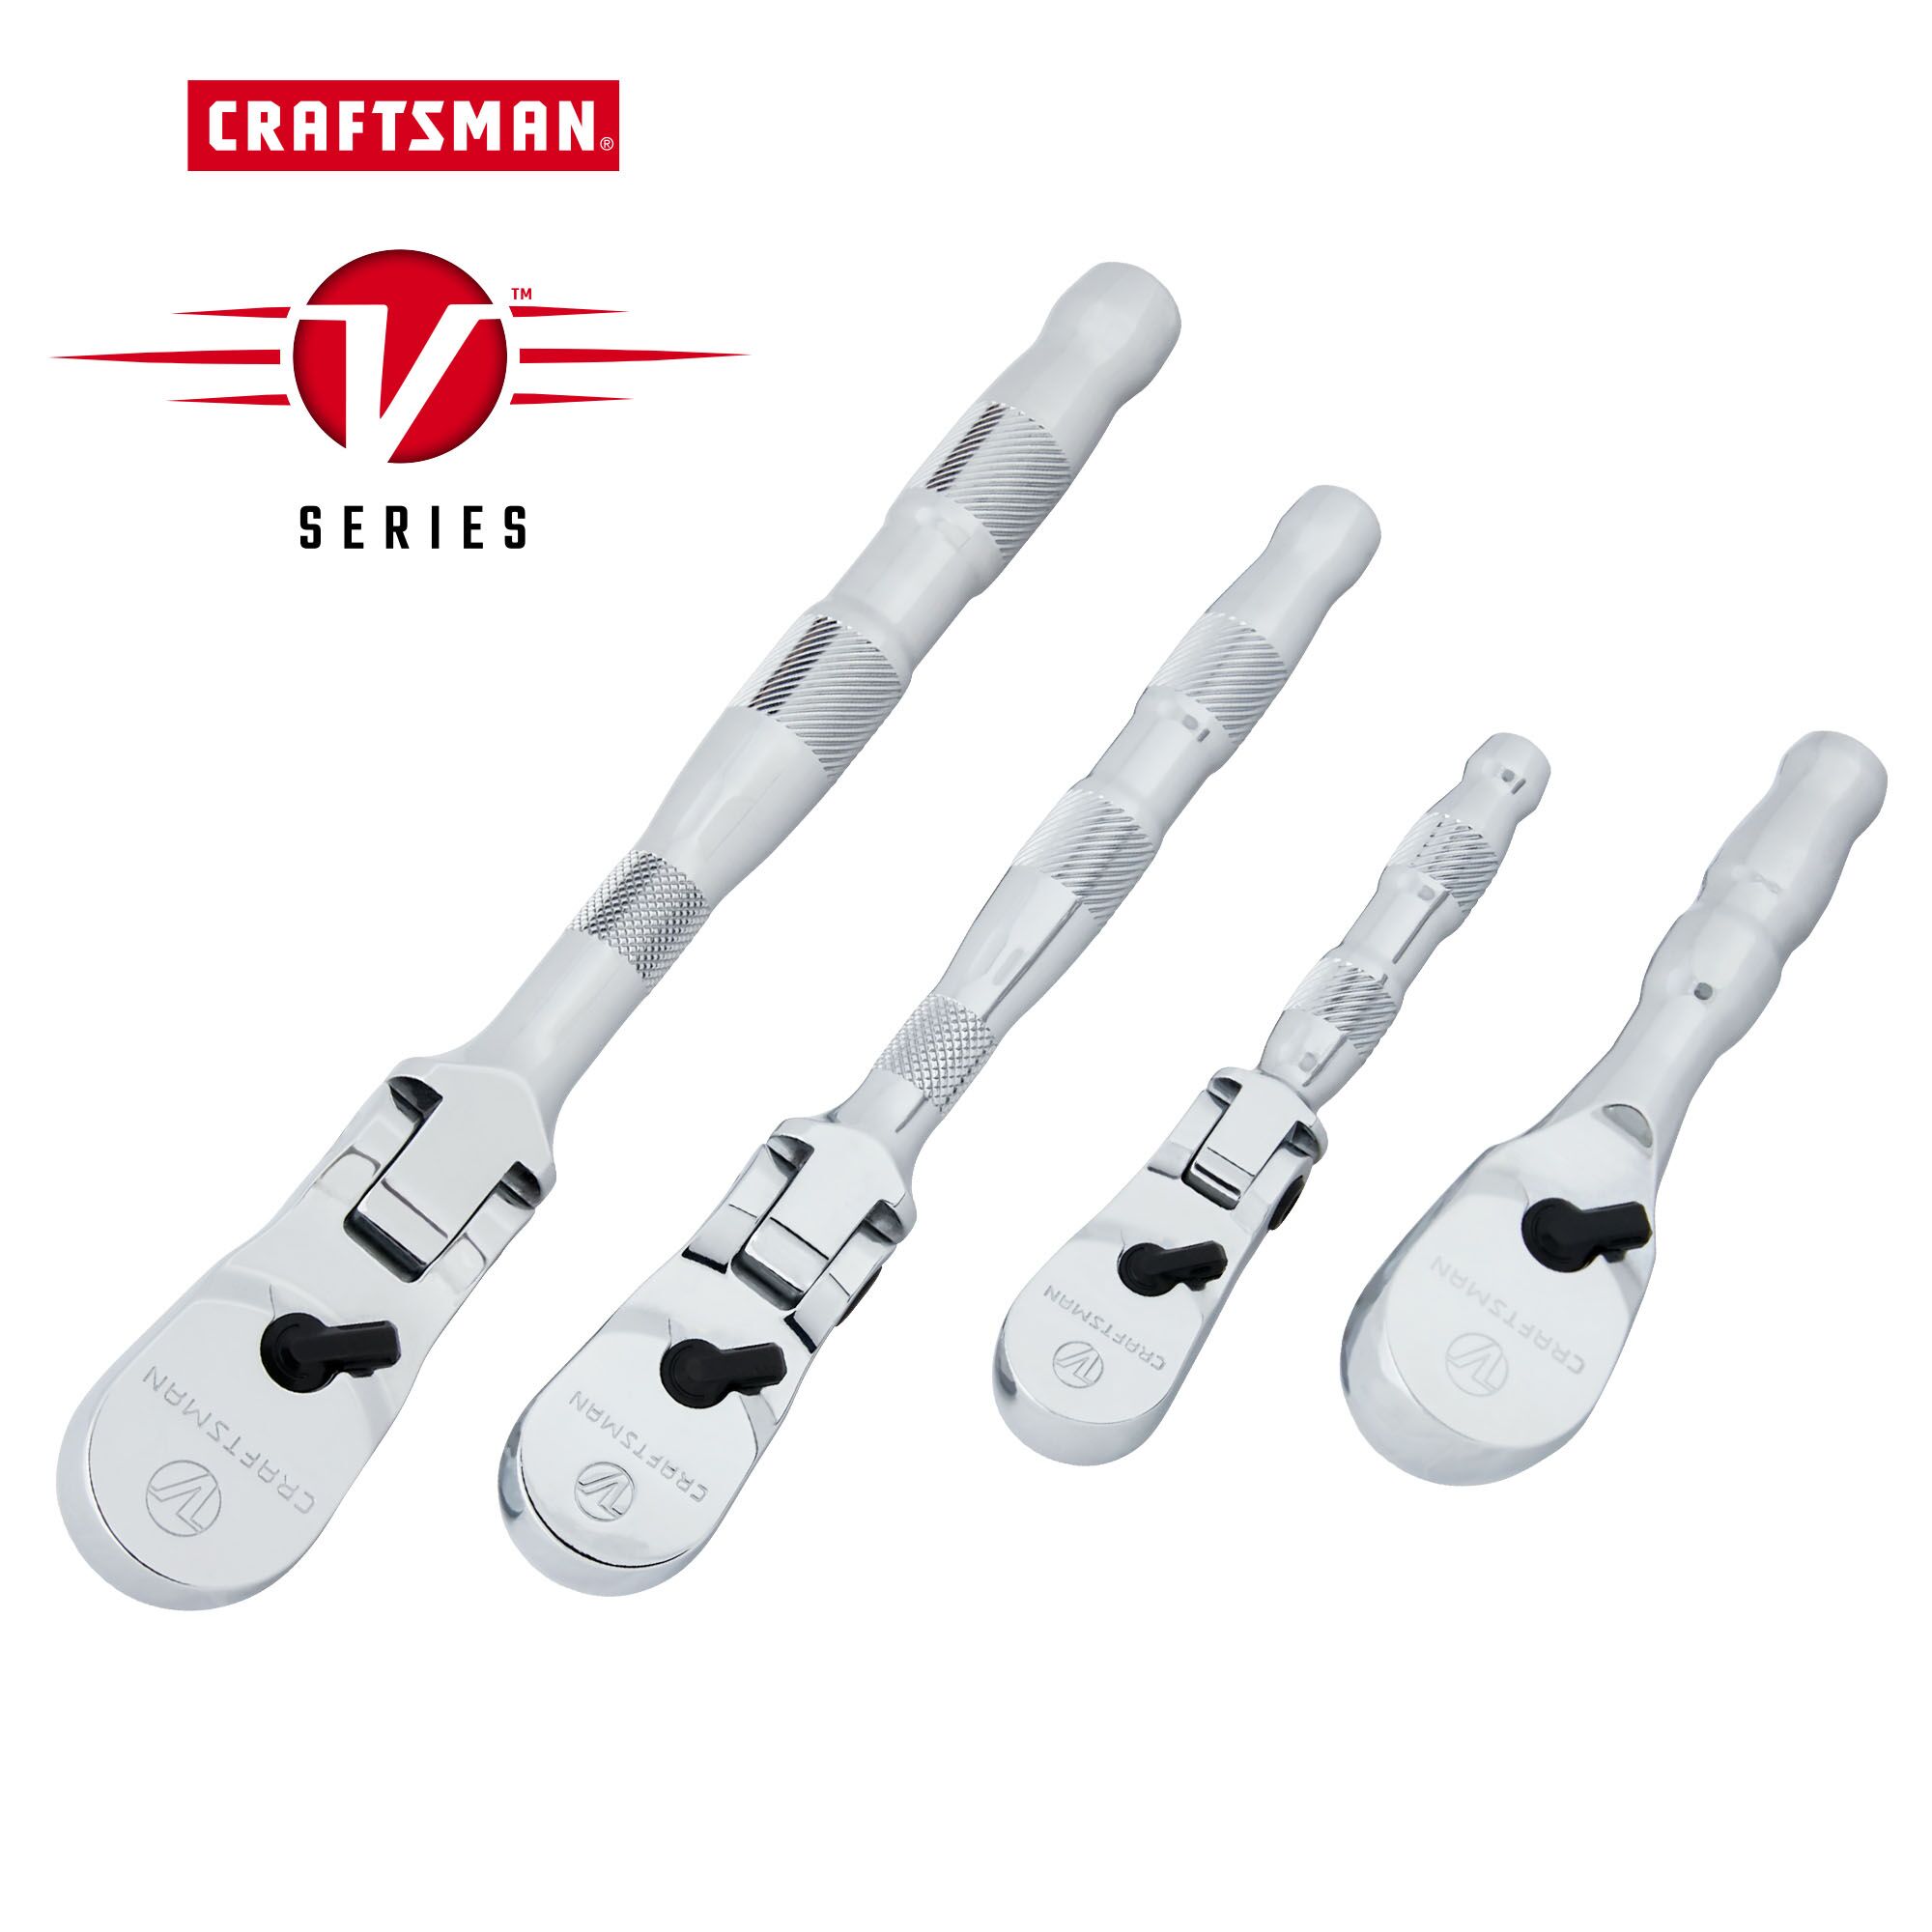 Graphic of CRAFTSMAN Ratchets: Set highlighting product features